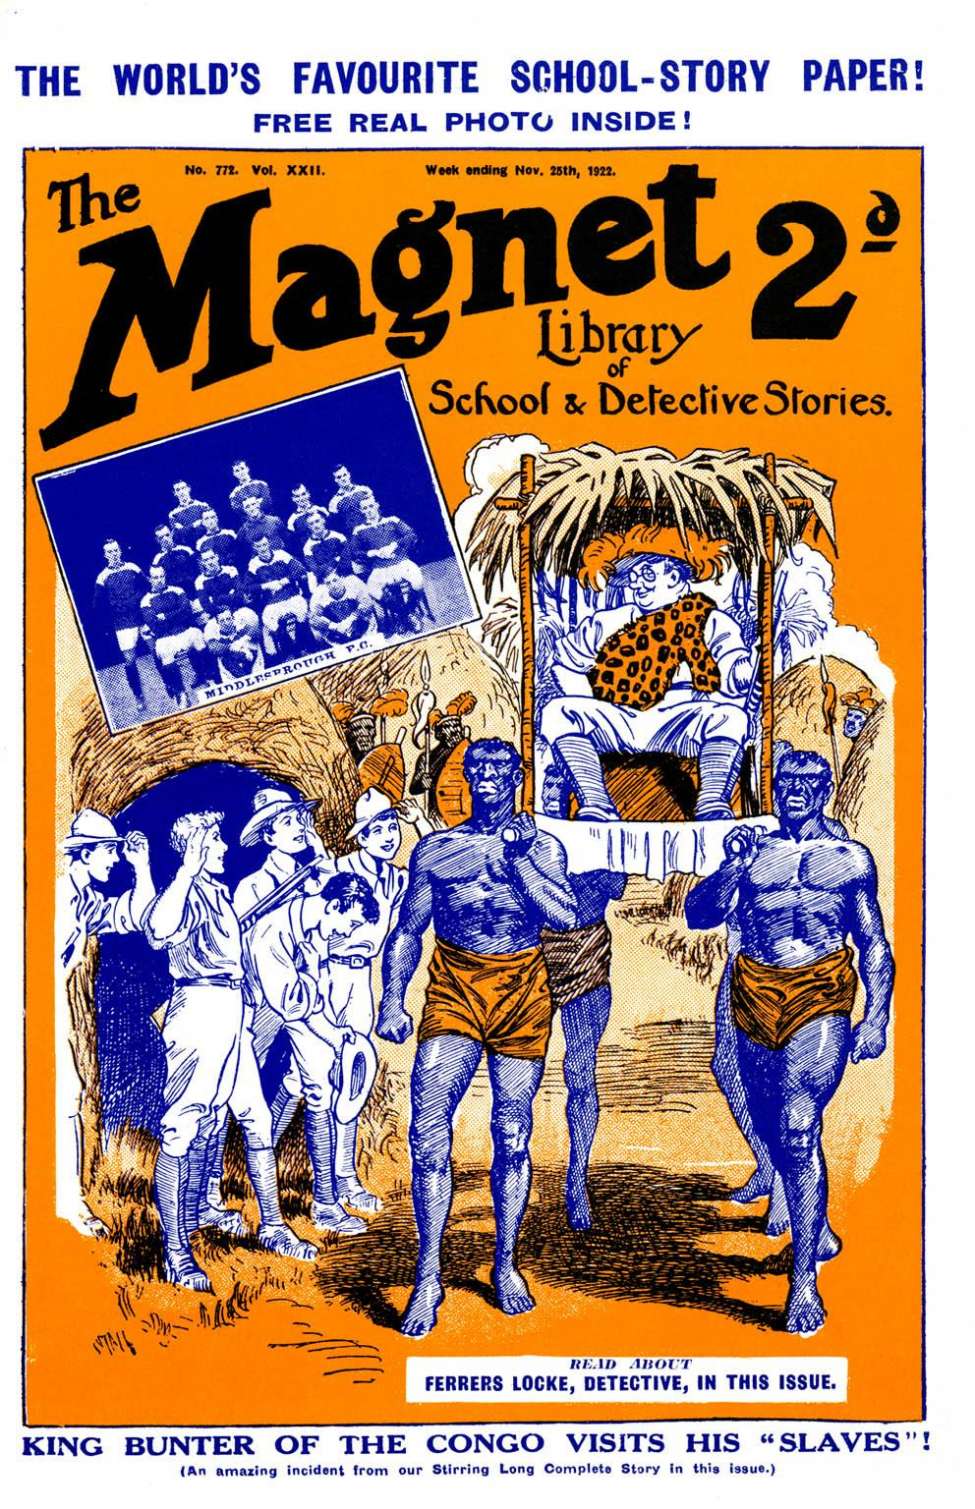 Book Cover For The Magnet 772 - King Bunter of the Congo!